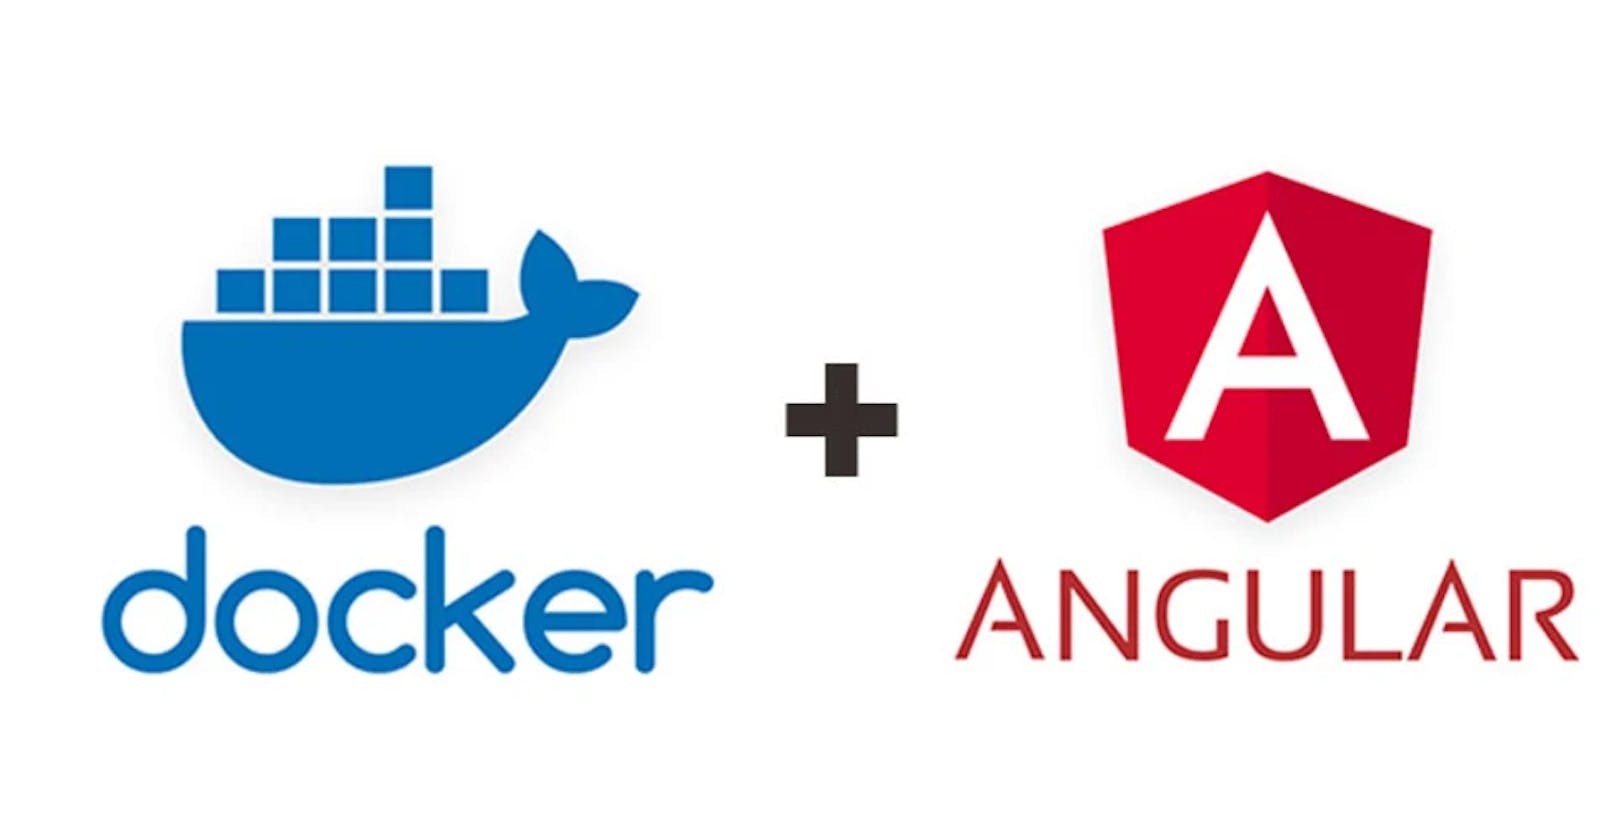 Setting up Docker and Angular dev environment with hot-reload (fast)